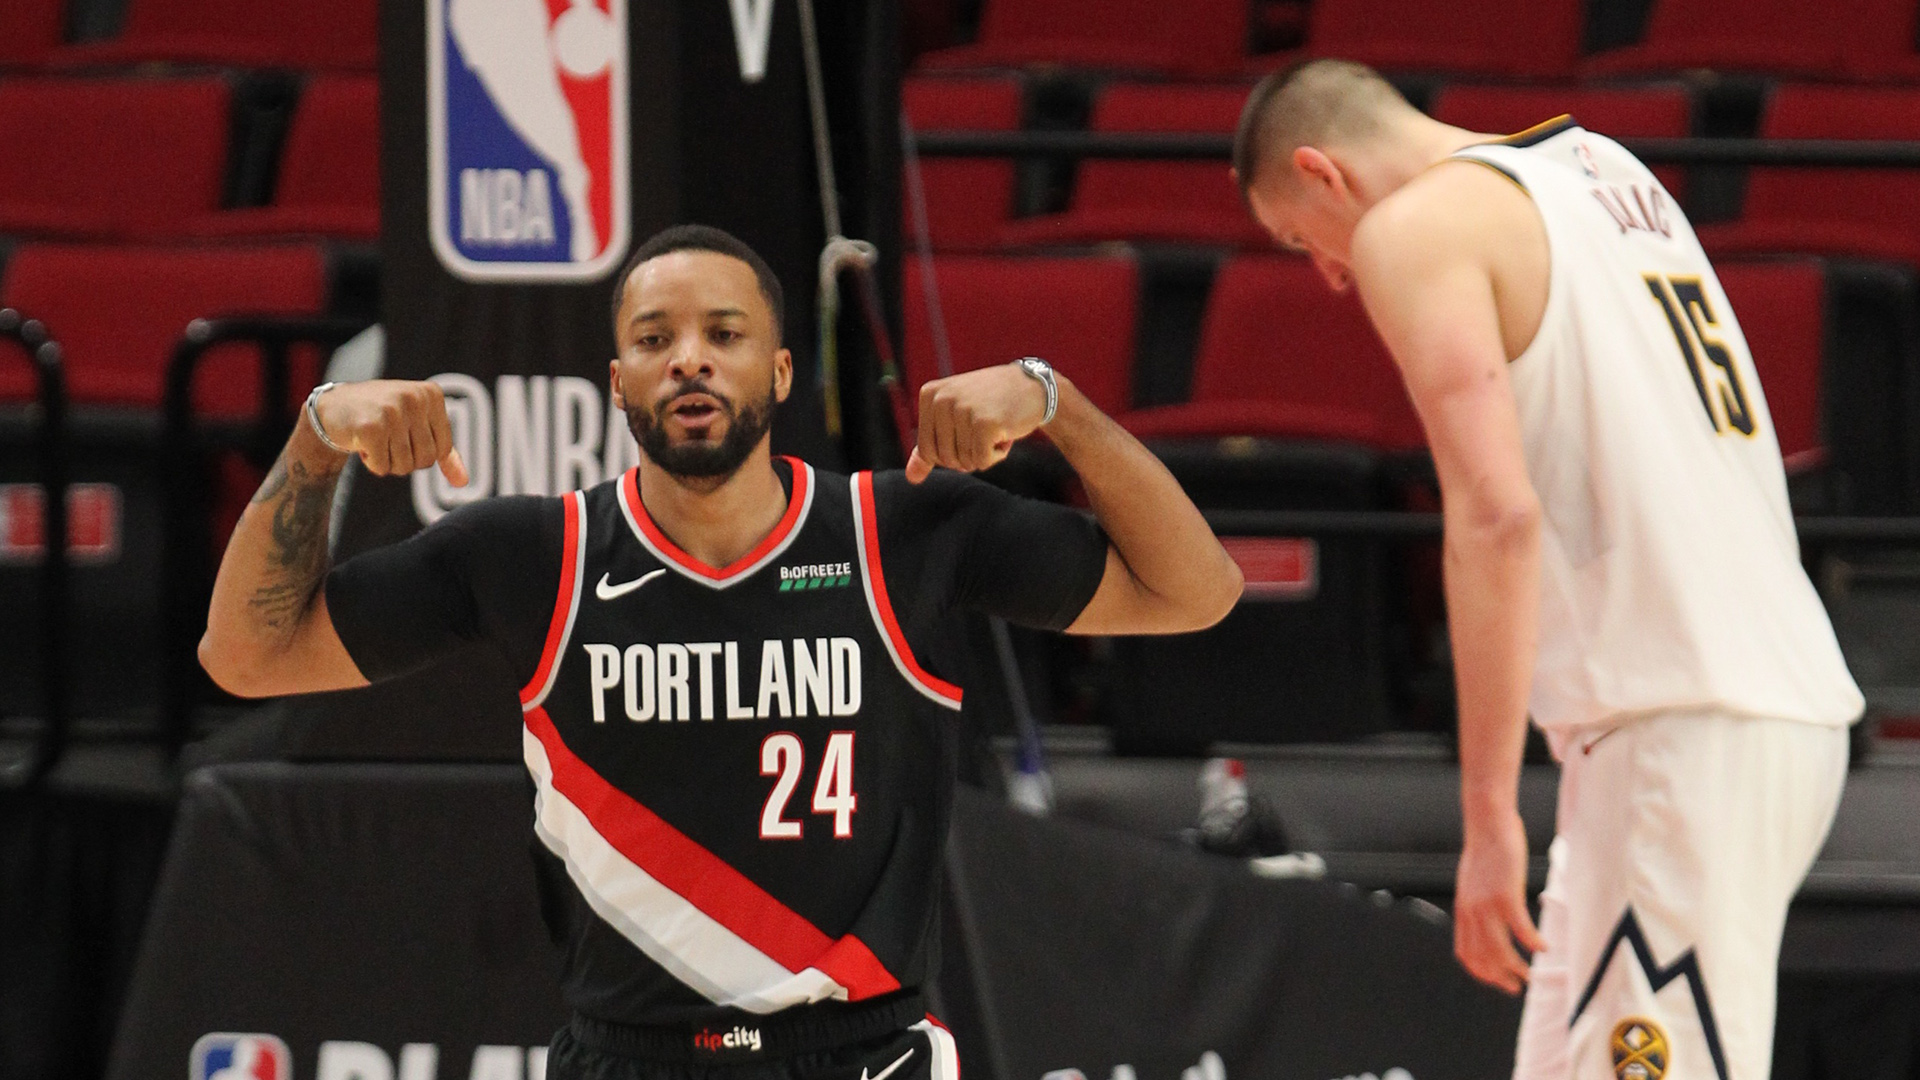 May 29, 2021; Portland, Oregon, USA; Portland Trail Blazers forward Norman Powell (24) reacts after scoring over Denver Nuggets center Nikola Jokic (15) in the second half during game four in the first round of the 2021 NBA Playoffs. at Moda Center. Mandatory Credit: Jaime Valdez-USA TODAY Sports